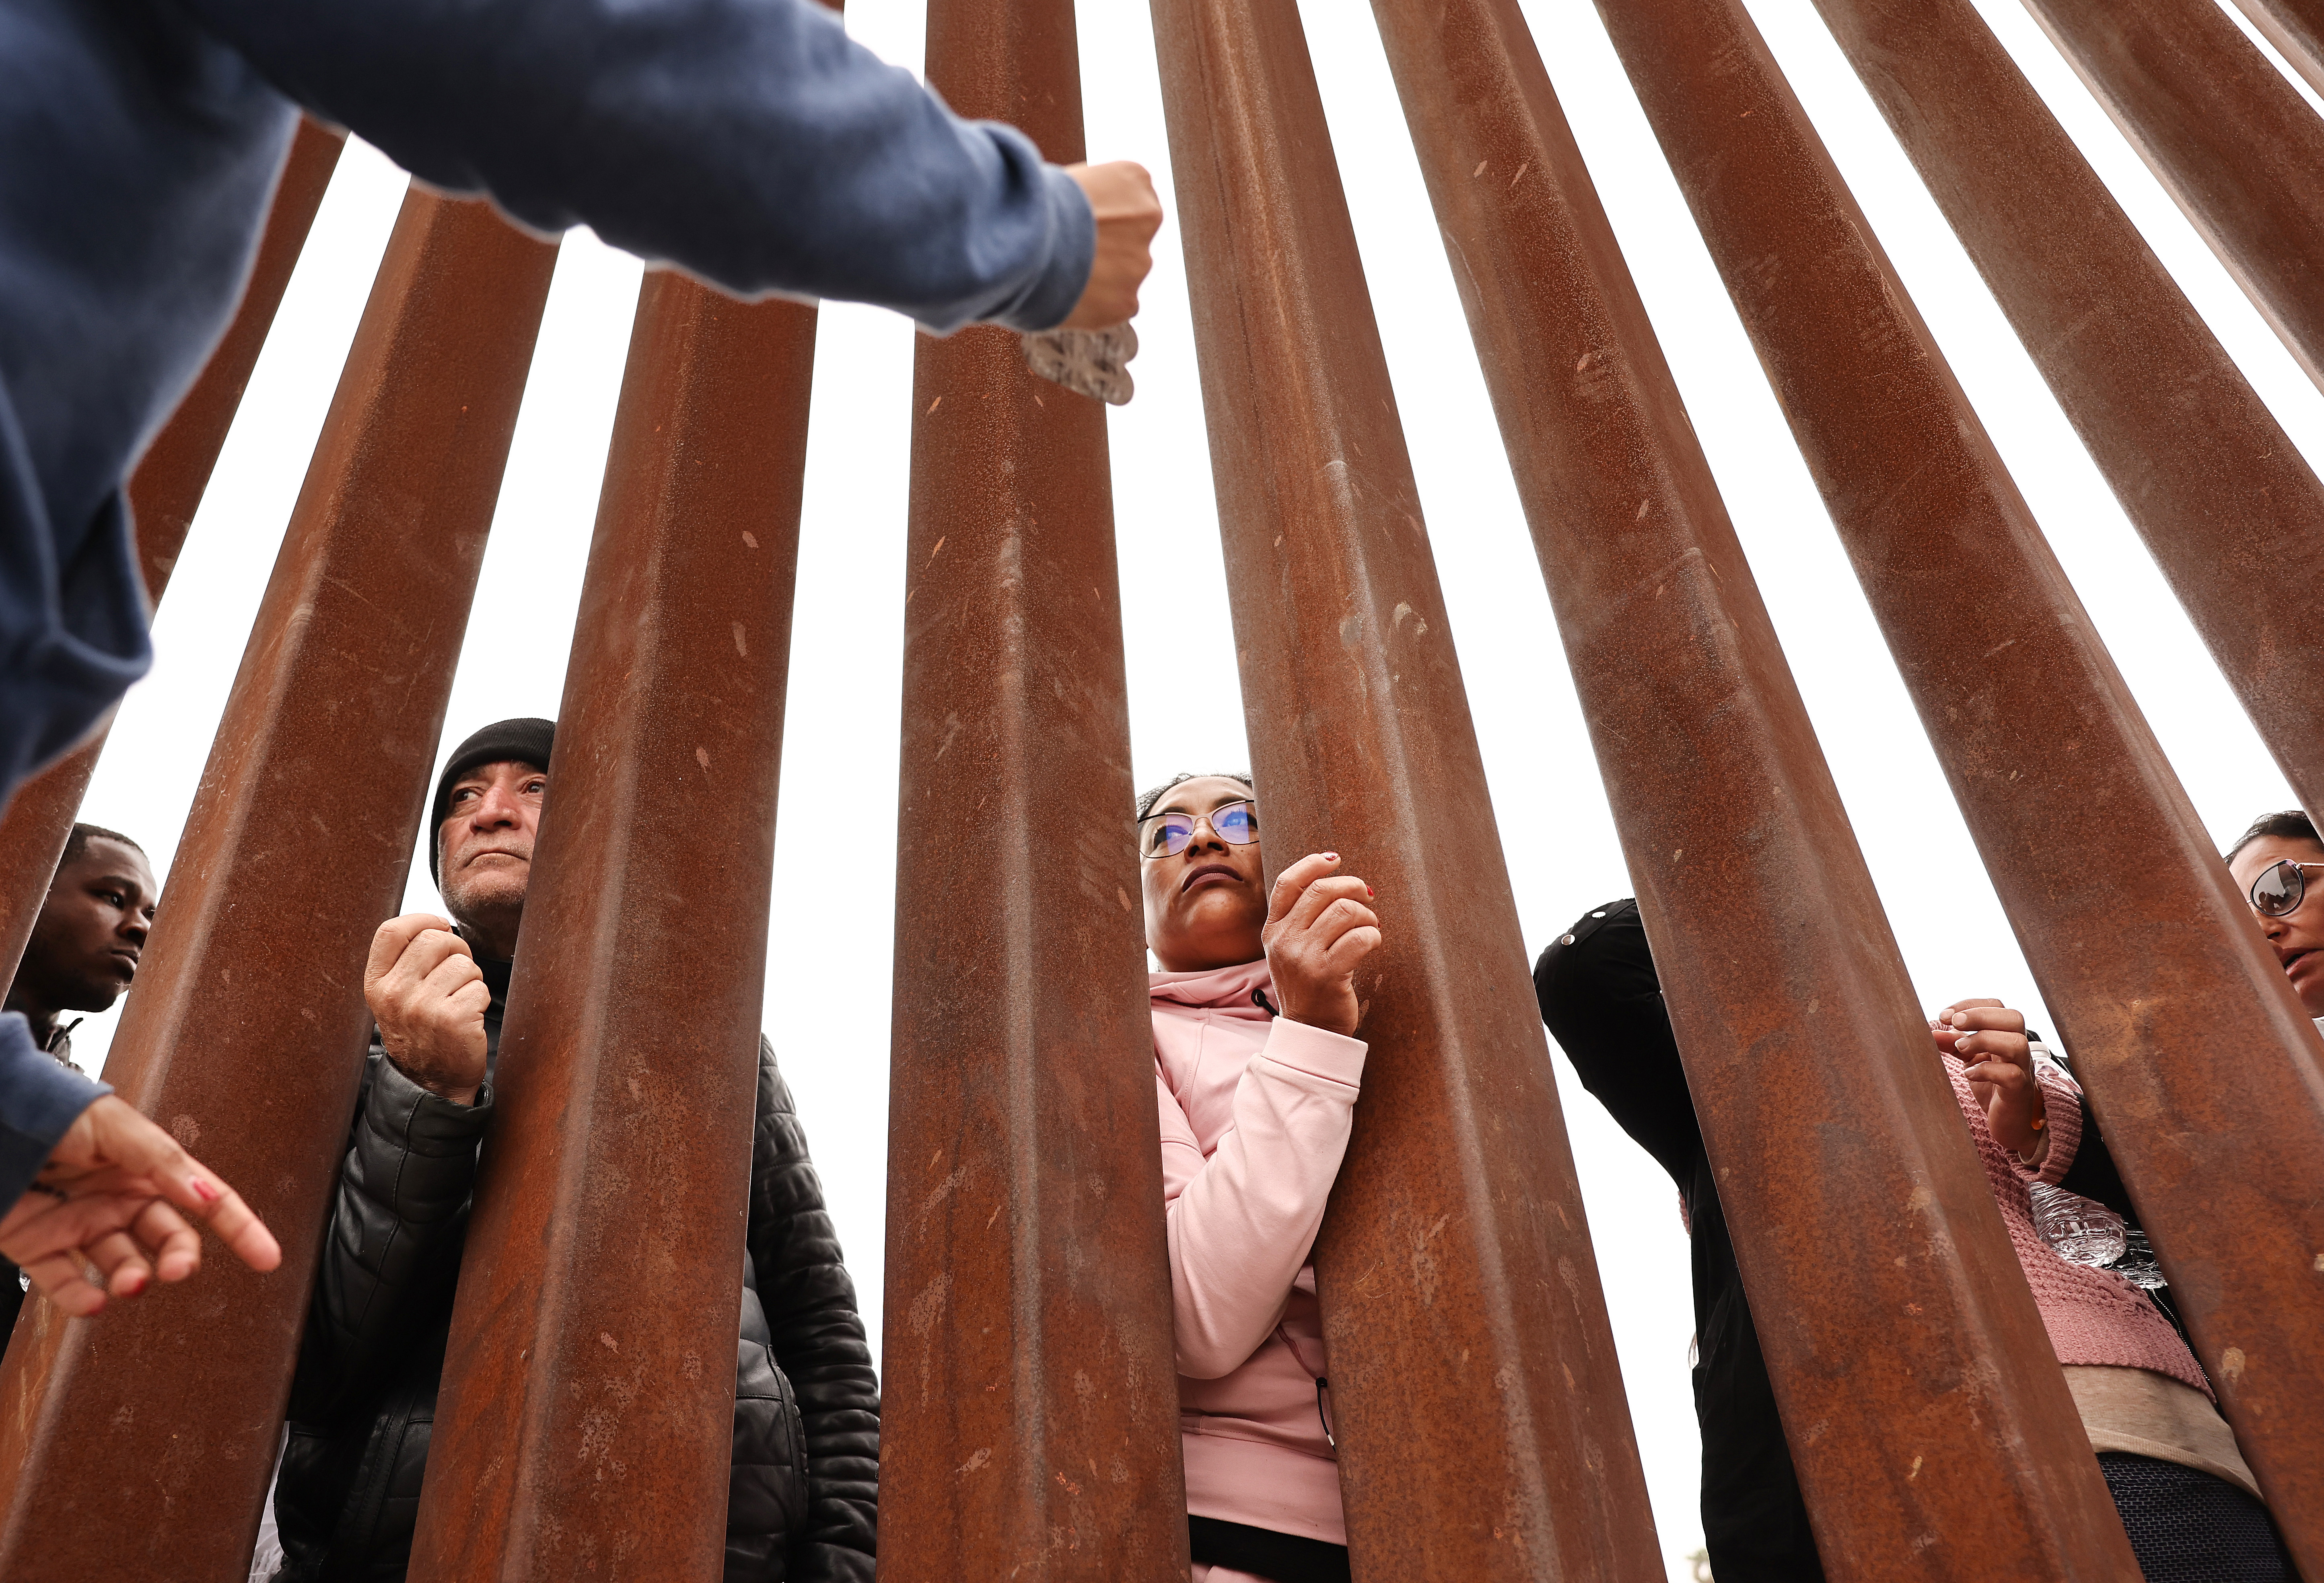 Several people look through the upright metal columns of a border wall as volunteers talk to them from the other side.